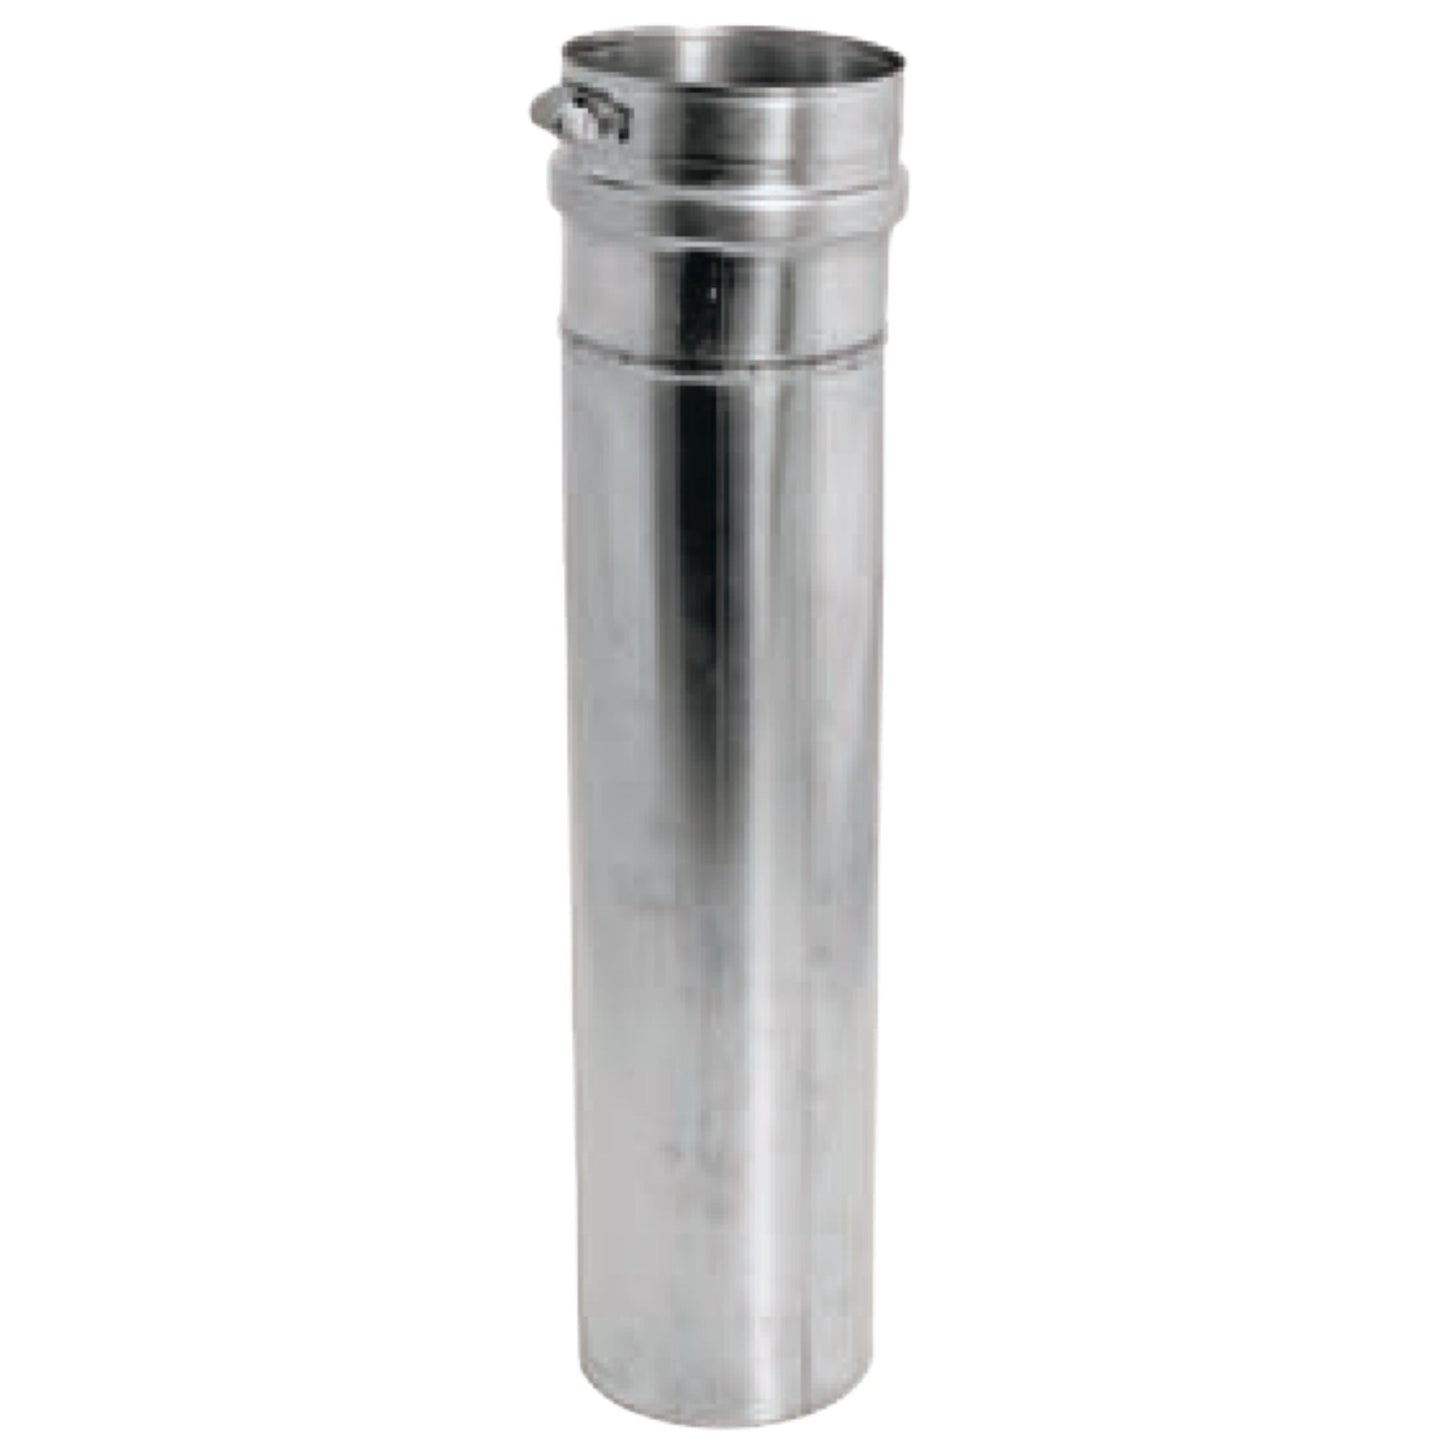 DuraVent FasNSeal 16" 2 Degree 29-4C Stainless Steel Adjustable Vent Length